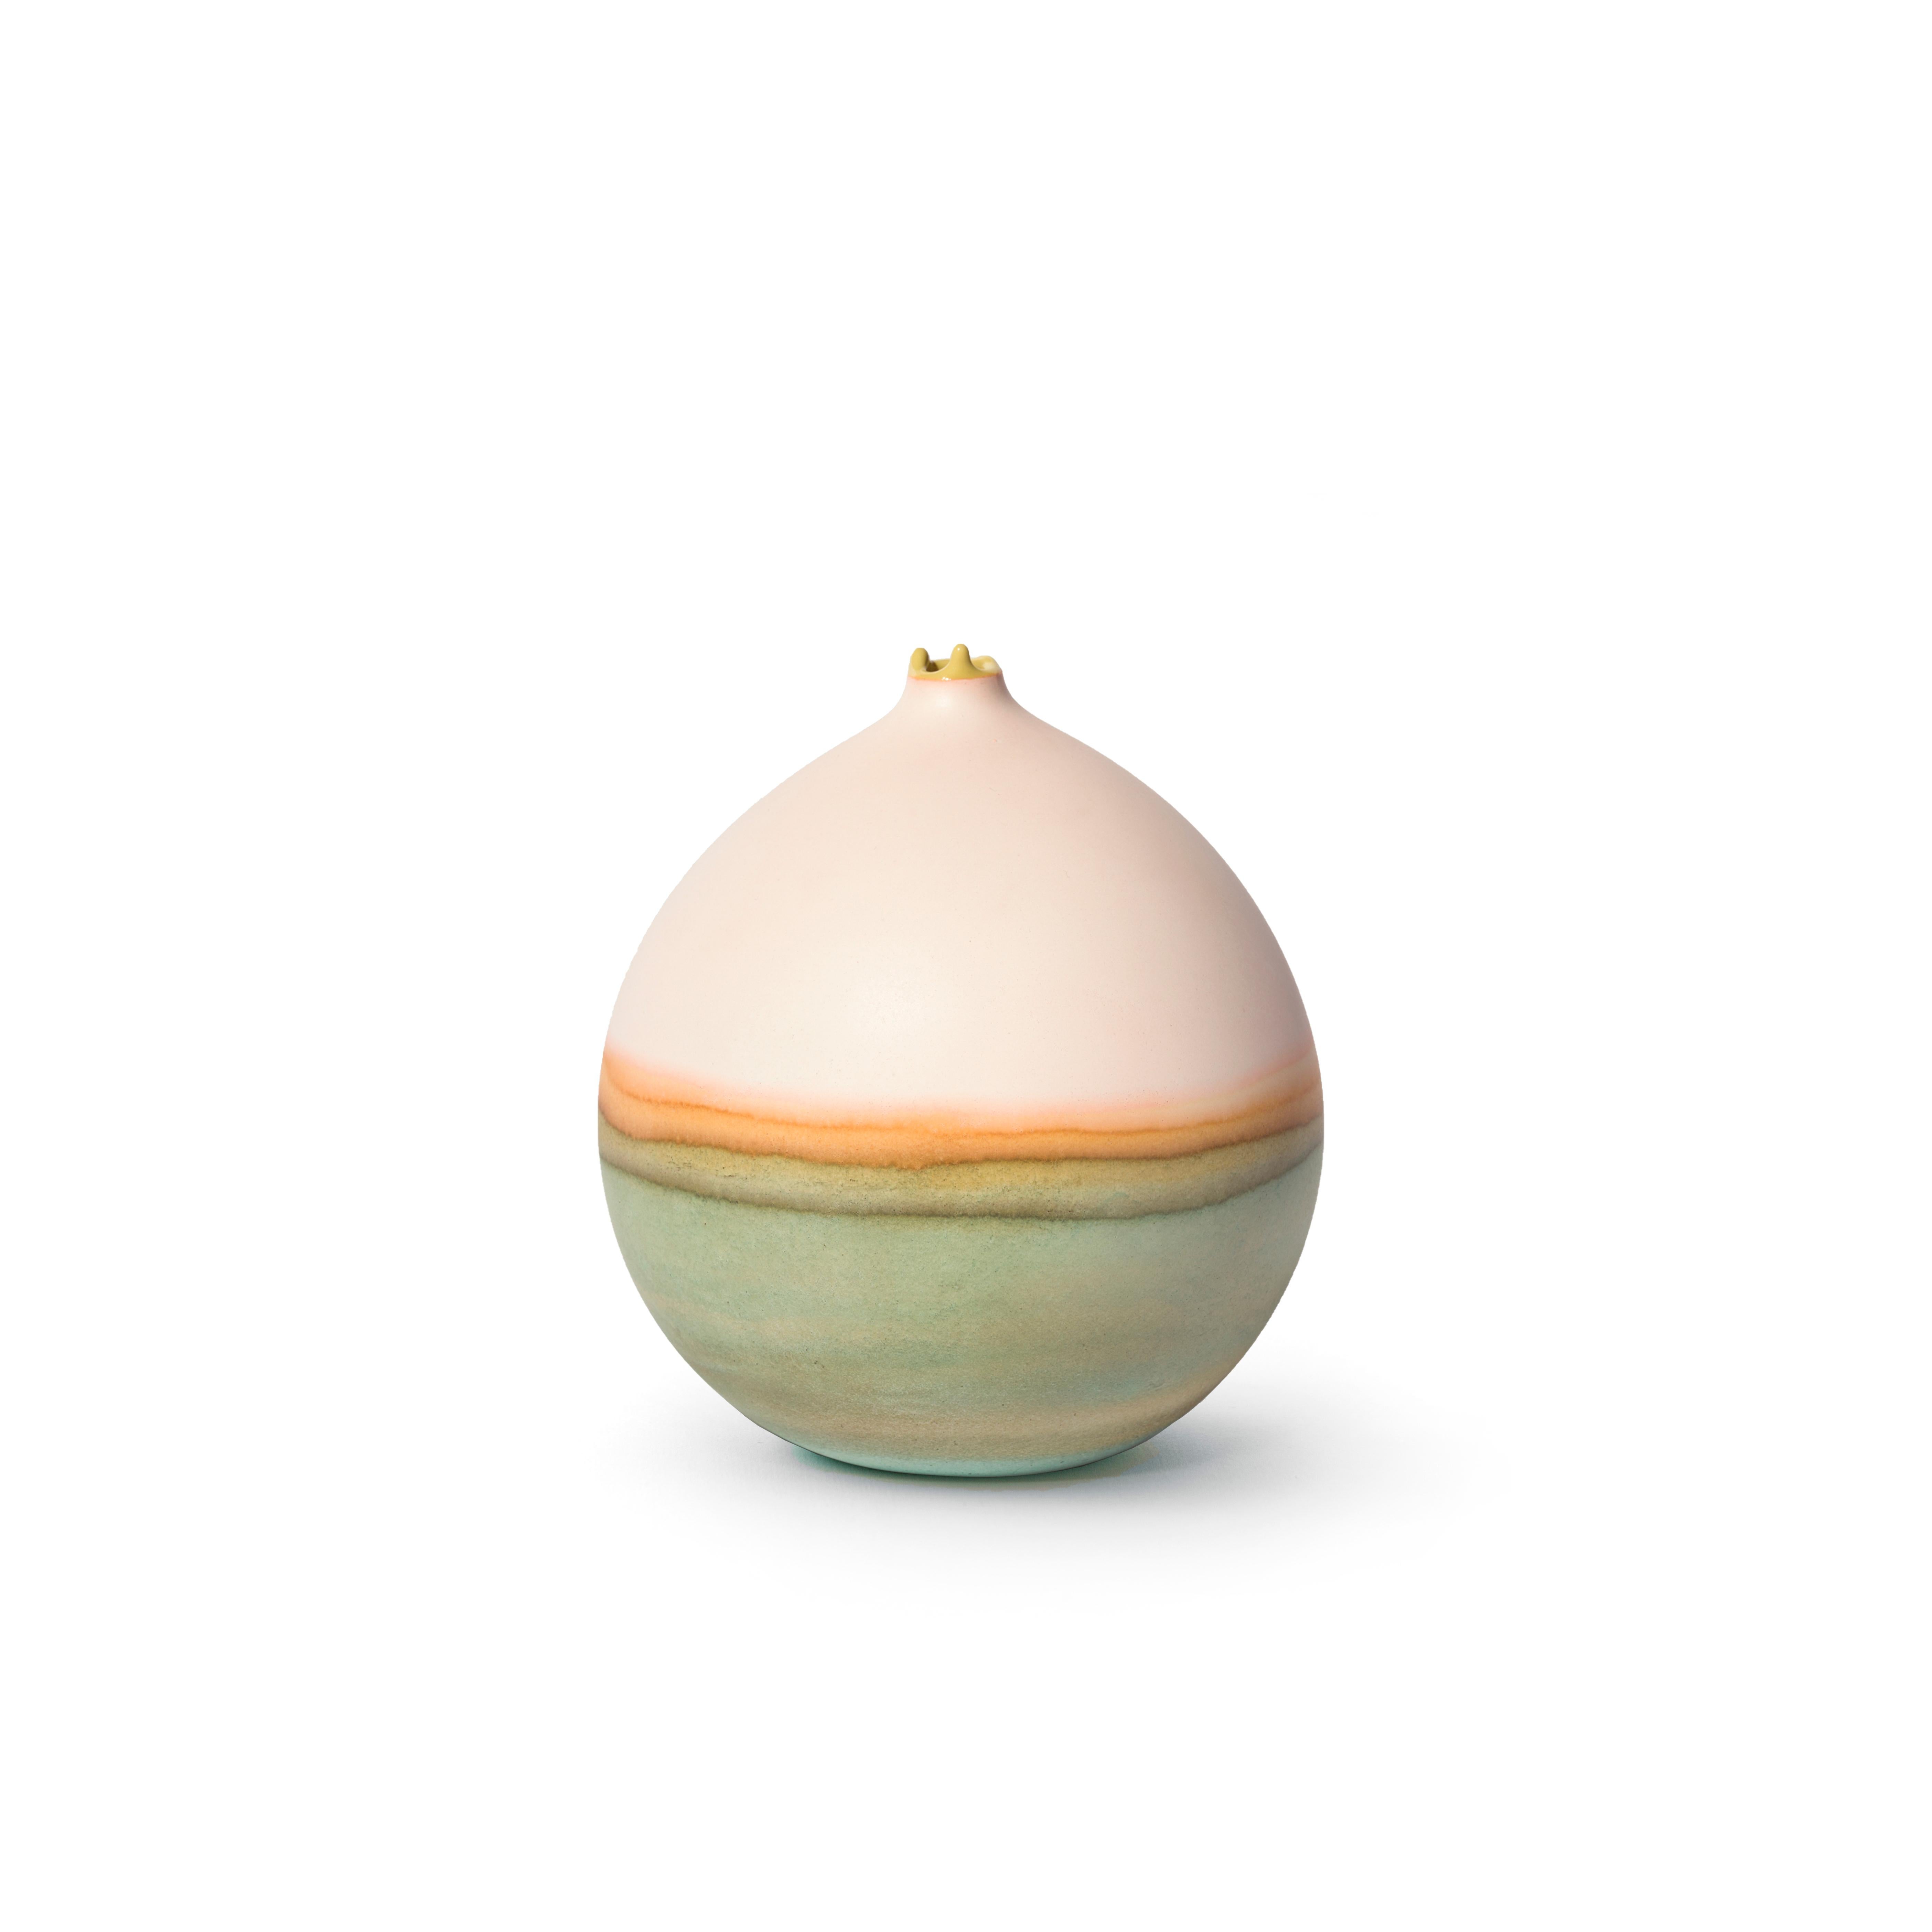 Peach Patina Pluto Vase by Elyse Graham
Dimensions: W 13 x D 13 x H 14 cm
Materials: Plaster, Resin
MOLDED, DYED, AND FINISHED BY HAND IN LA. CUSTOMIZATION
AVAILABLE.
ALL PIECES ARE MADE TO ORDER

This collection of vessels is inspired by striated